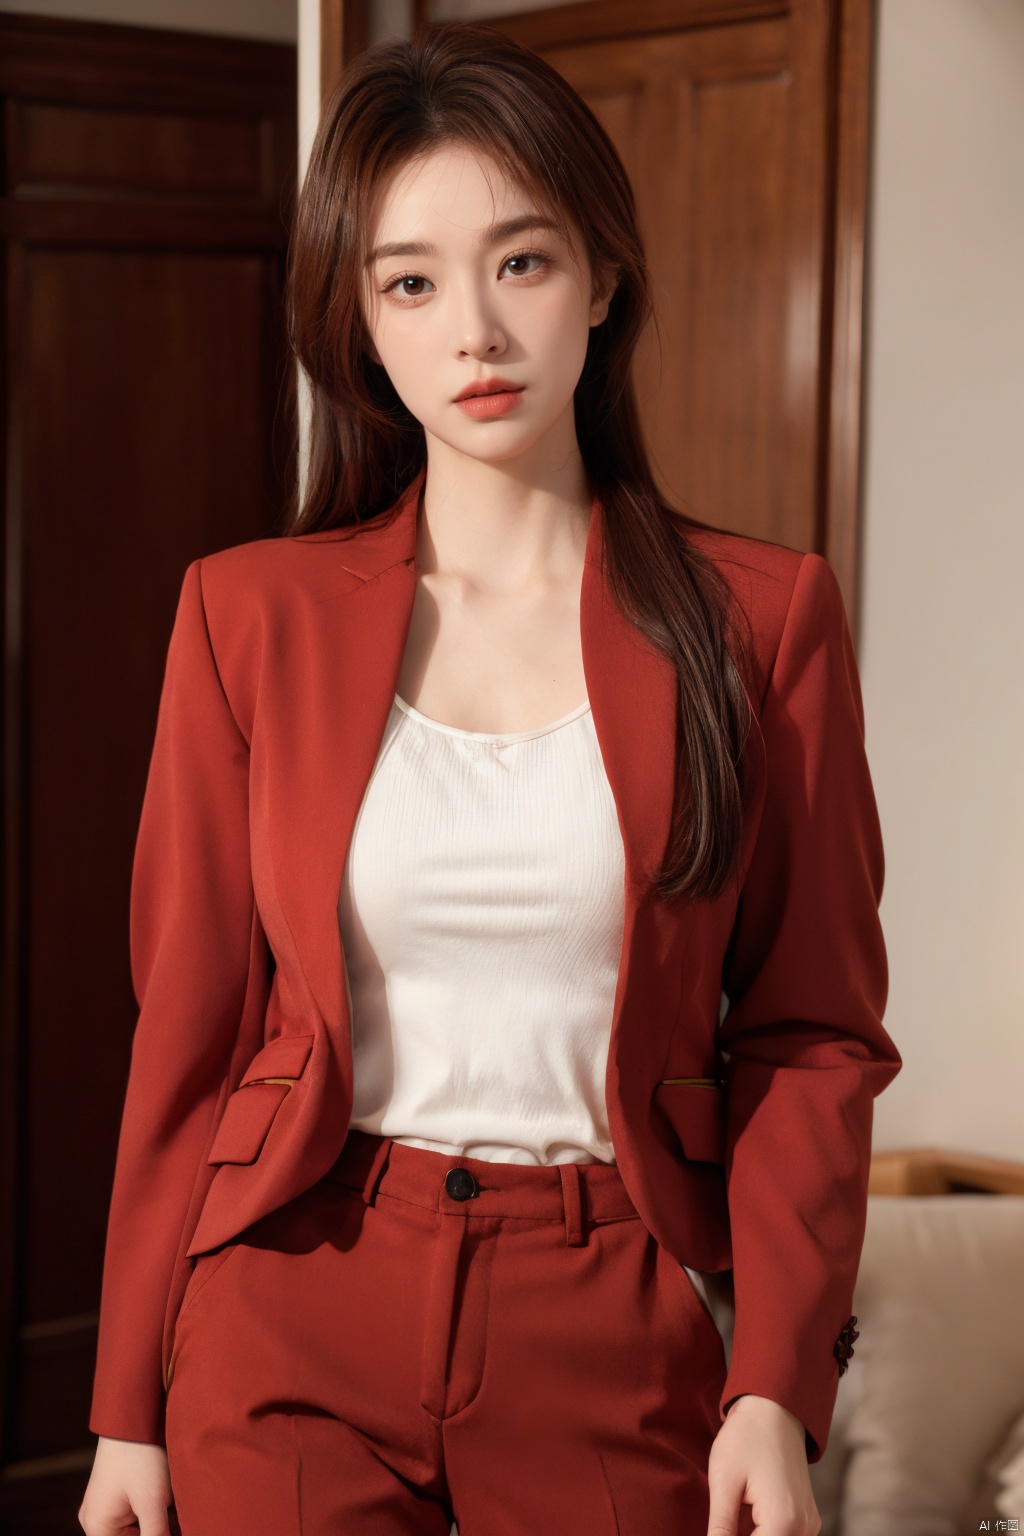  Xlongni,1Girl, suit, (photo reality: 1.3) , Edge lighting, (high detail skin: 1.2) , 8K Ultra HD, high quality, high resolution, (photo reality: 1.3) , (wear a red suit jacket, white shirt inside:1.29), large breasts, high-grade feeling, texture pull full, 1 girl,Xlongni,(big_breasts:1.39)